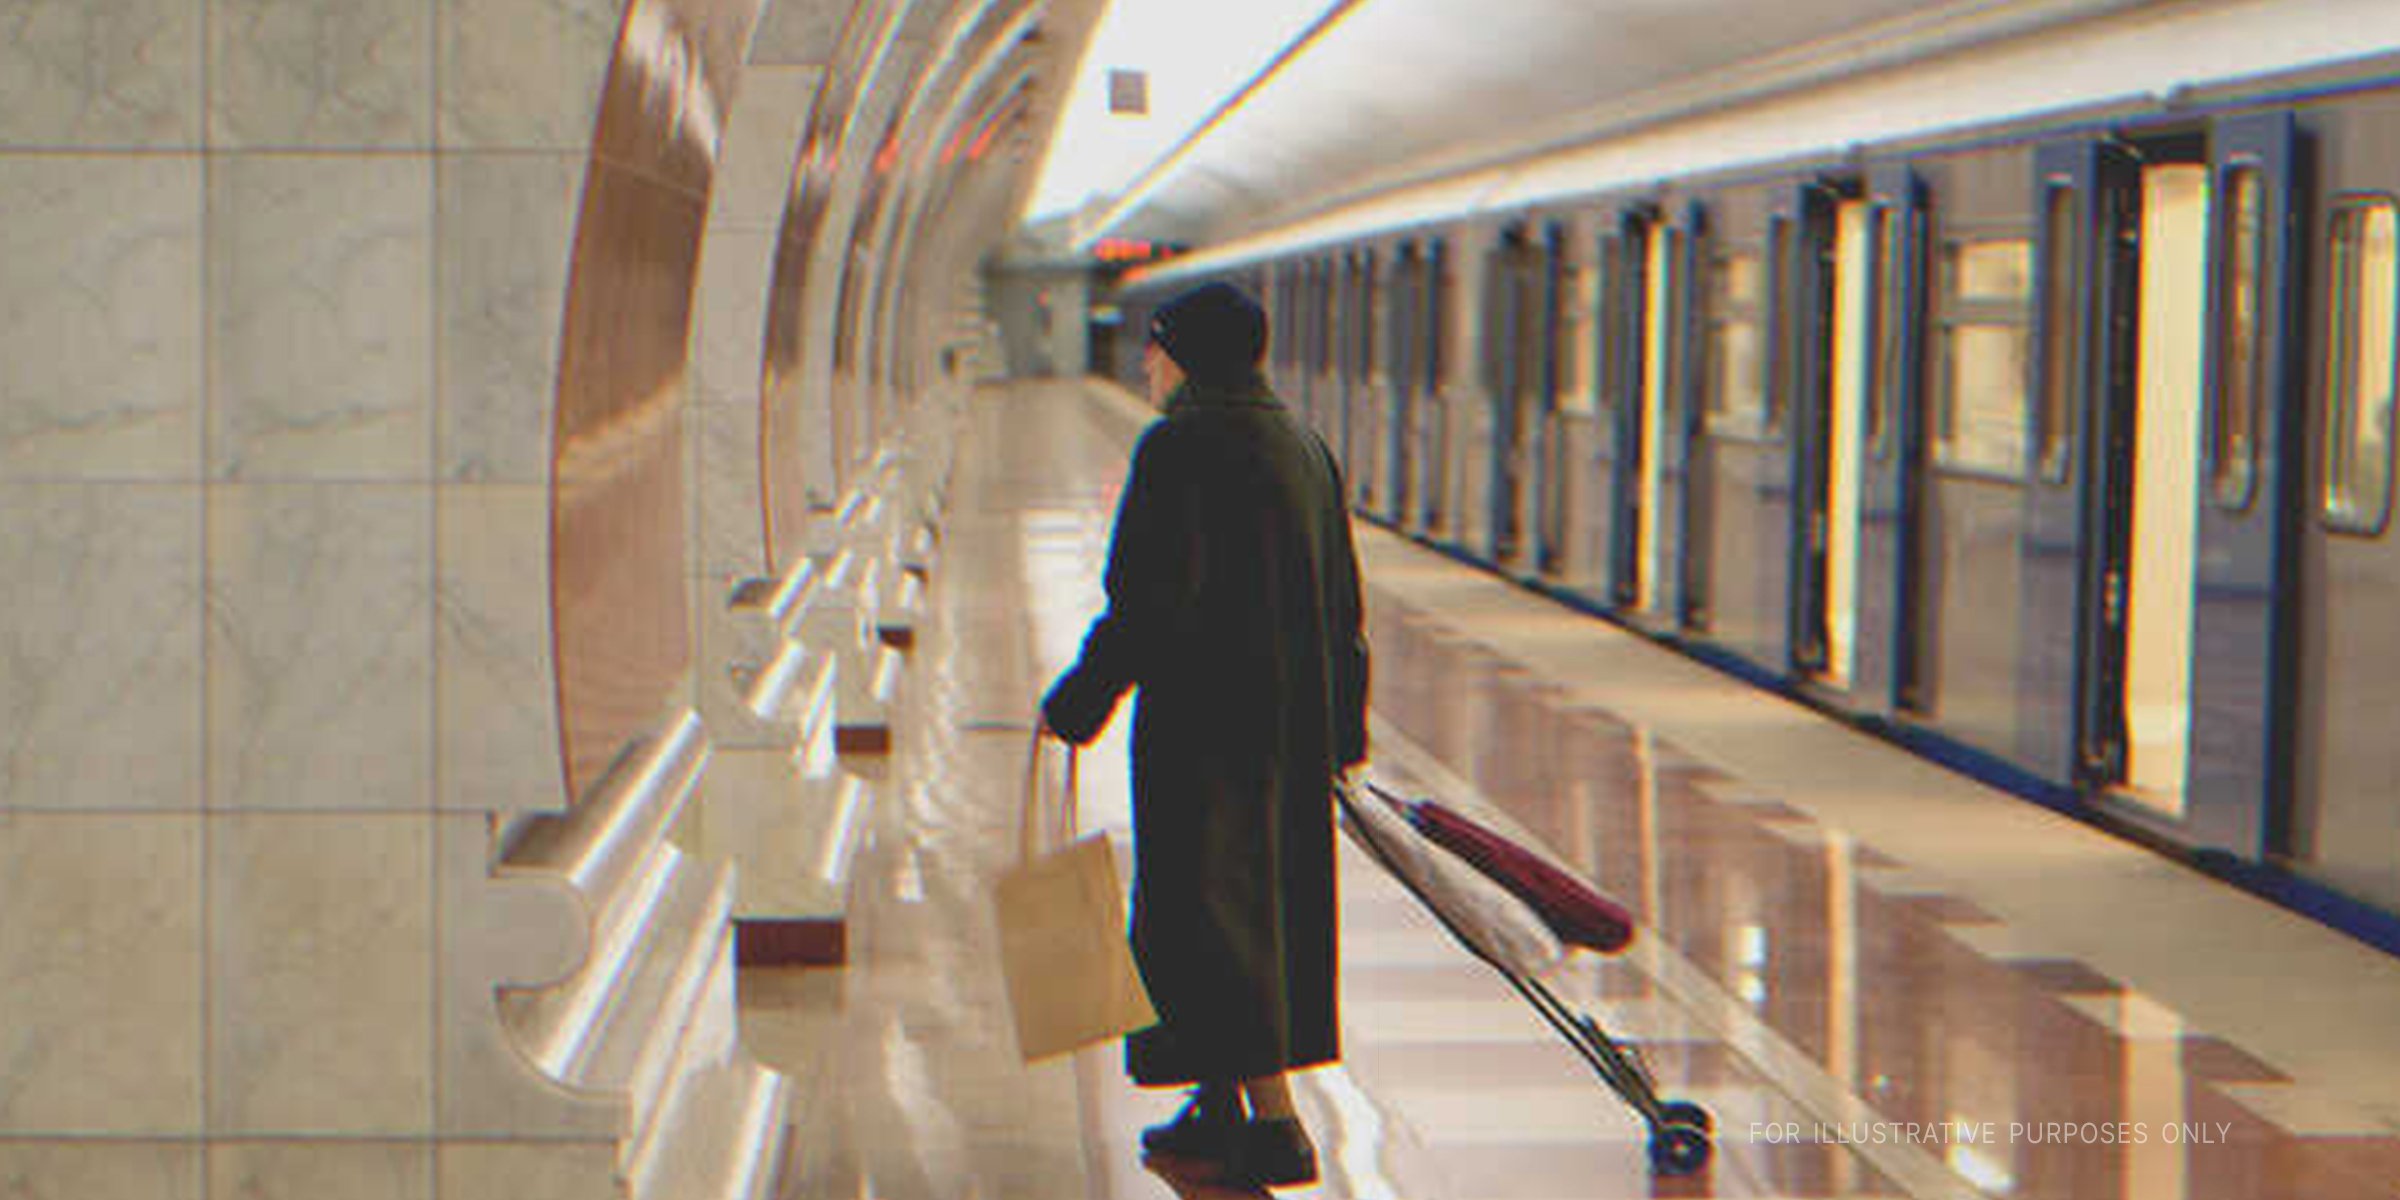 Lonely Old Lady In Subway. | Source: Shutterstock